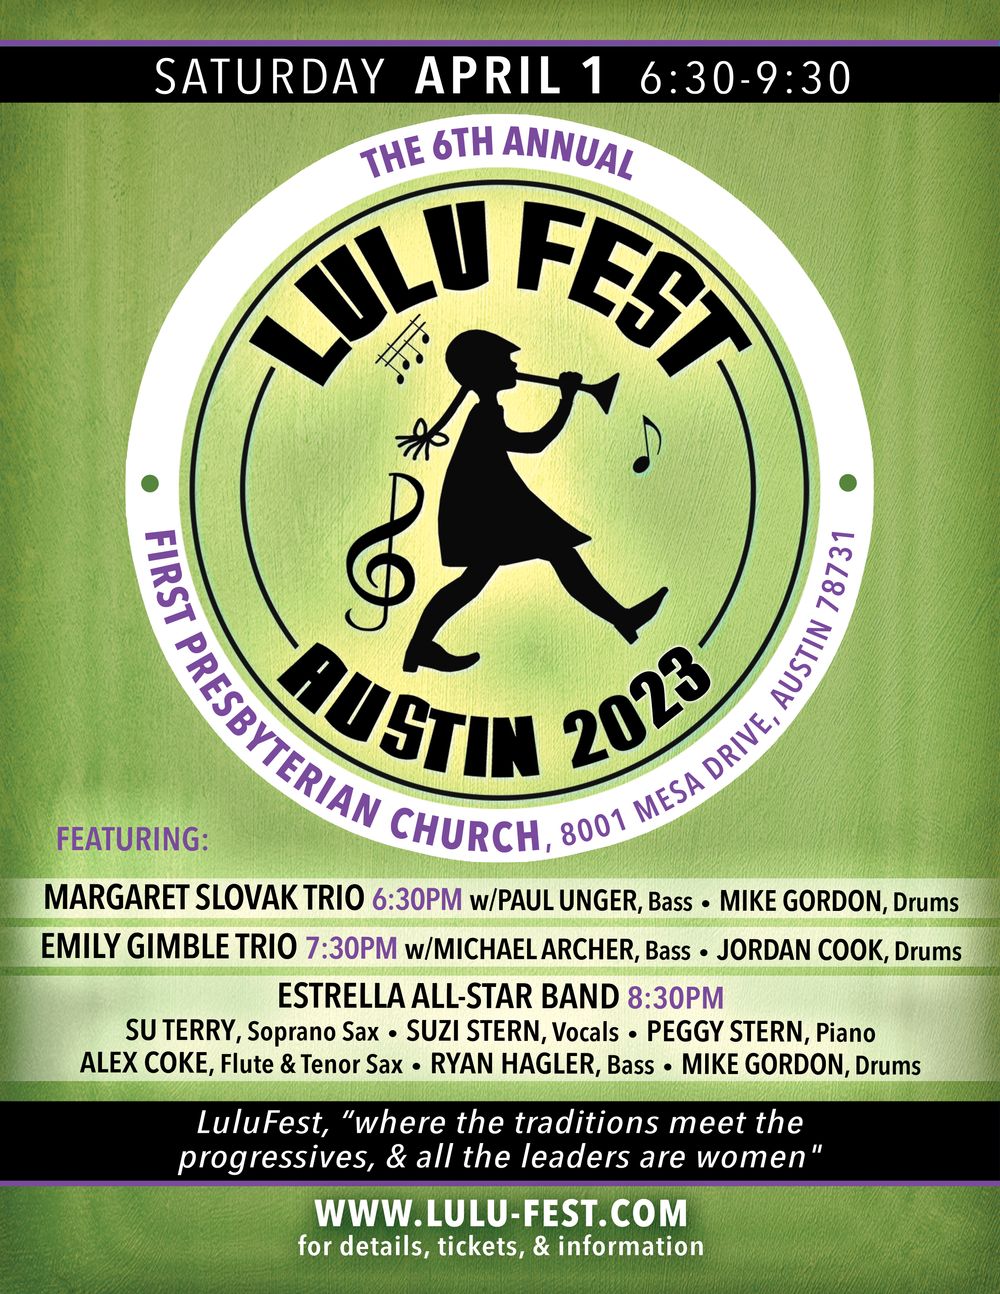 LuluFest promo poster with the same details listed in text below.